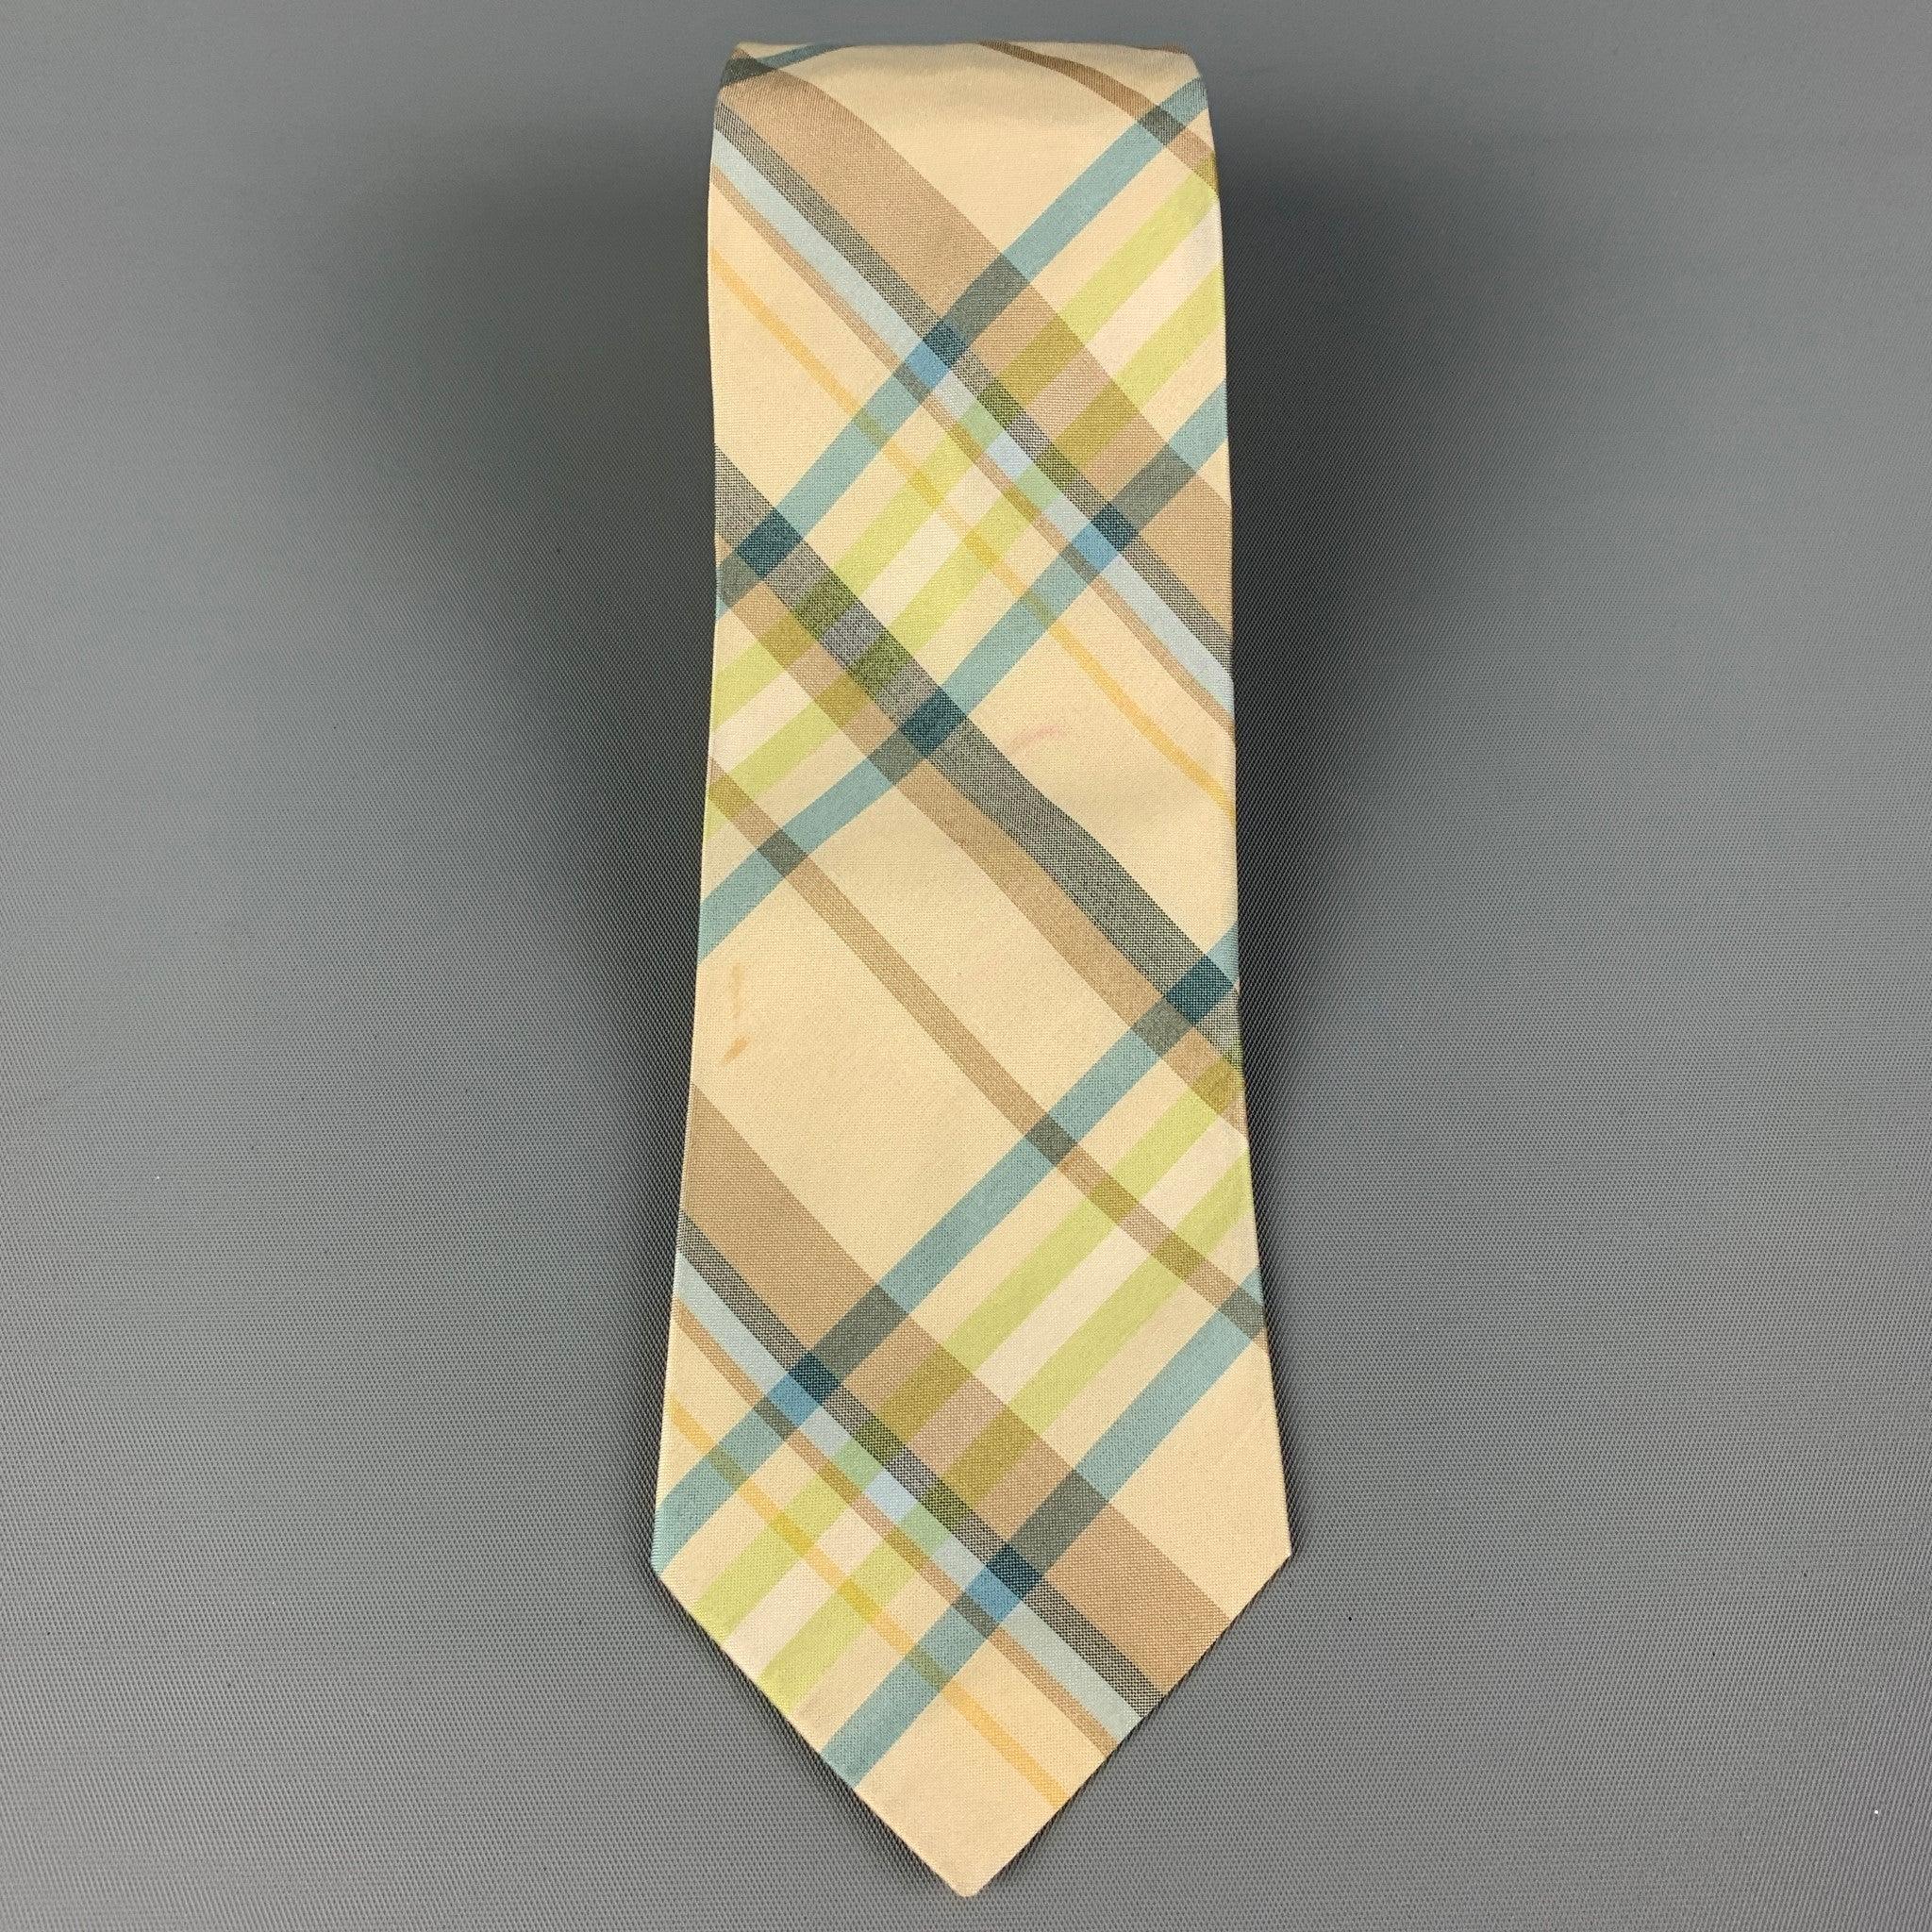 JIL SANDER
necktie comes in a yellow & blue silk with a all over plaid print. Made in Italy. Good Pre-Owned Condition. Light marks. Width: 2.75 inches  Length: 58 inches 
  
  
 
Reference: 119897
Category: Tie
More Details
    
Brand:  JIL